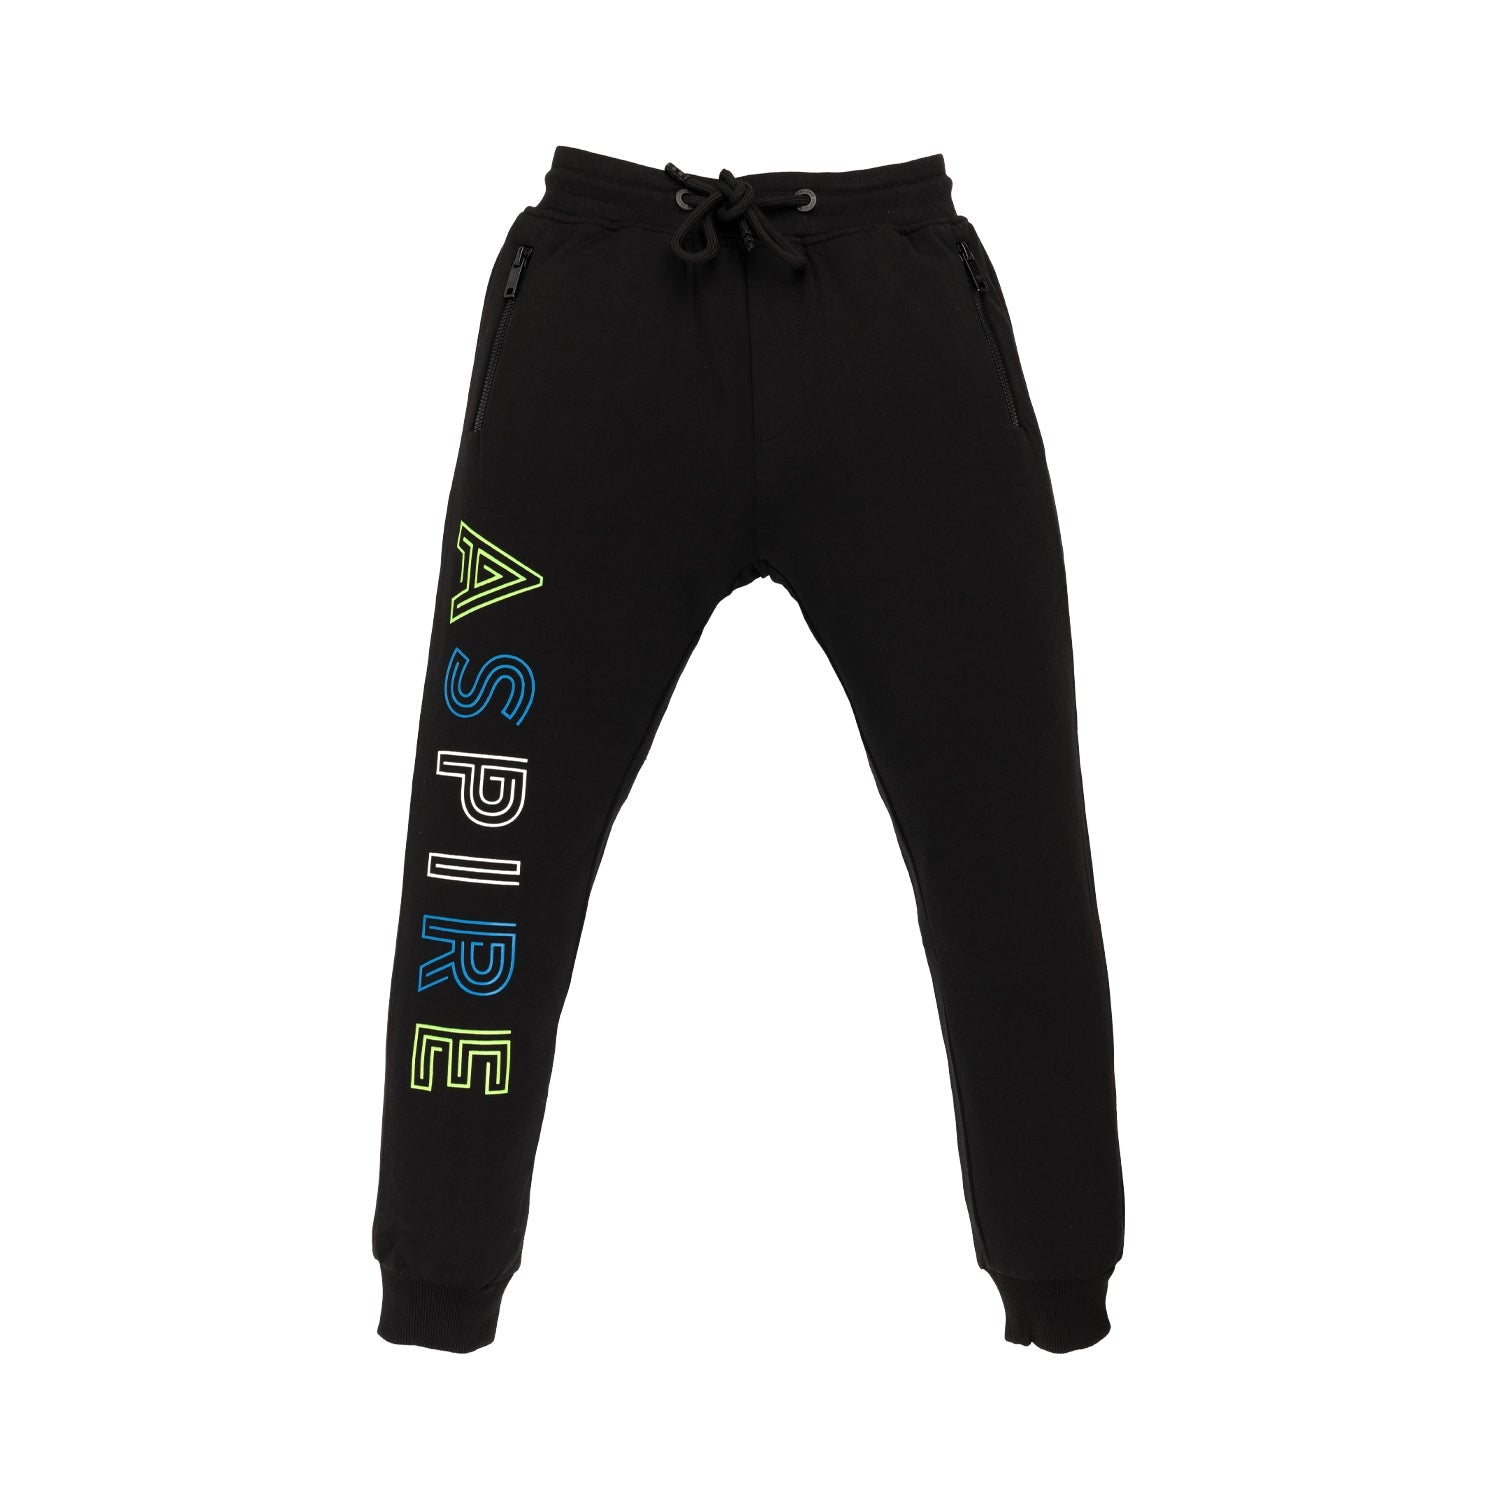 joggers for boys